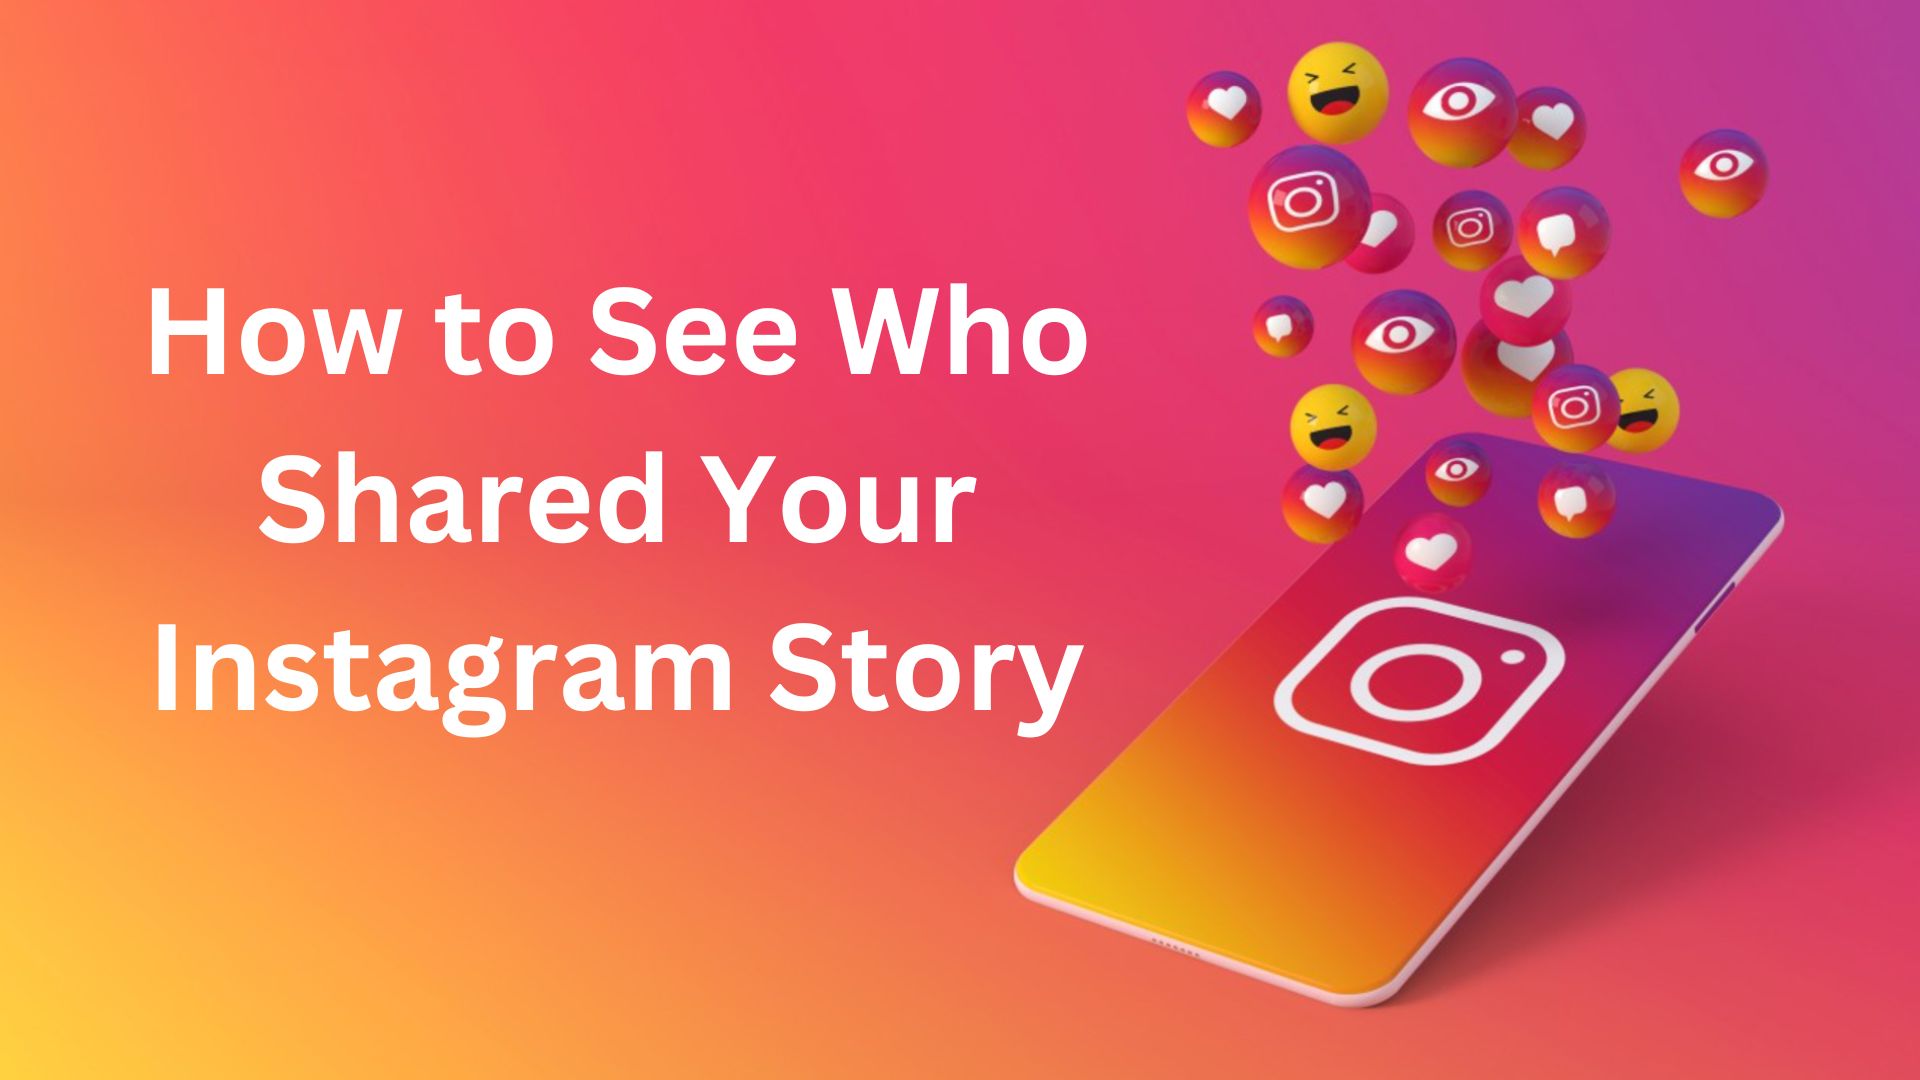 How To See Who Shared Your Instagram Story